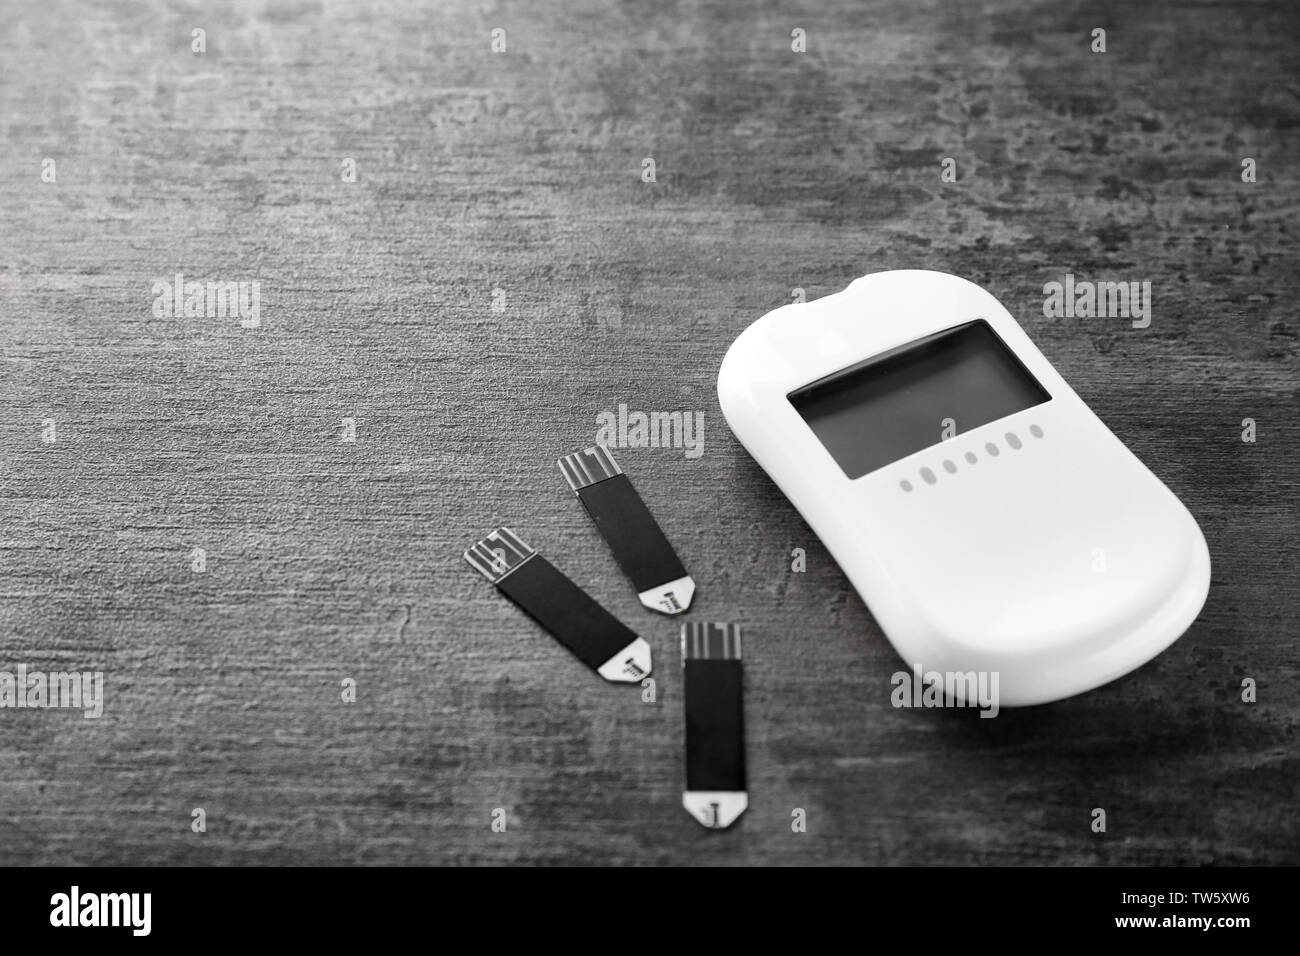 Digital glucose meter and test strips on table Stock Photo